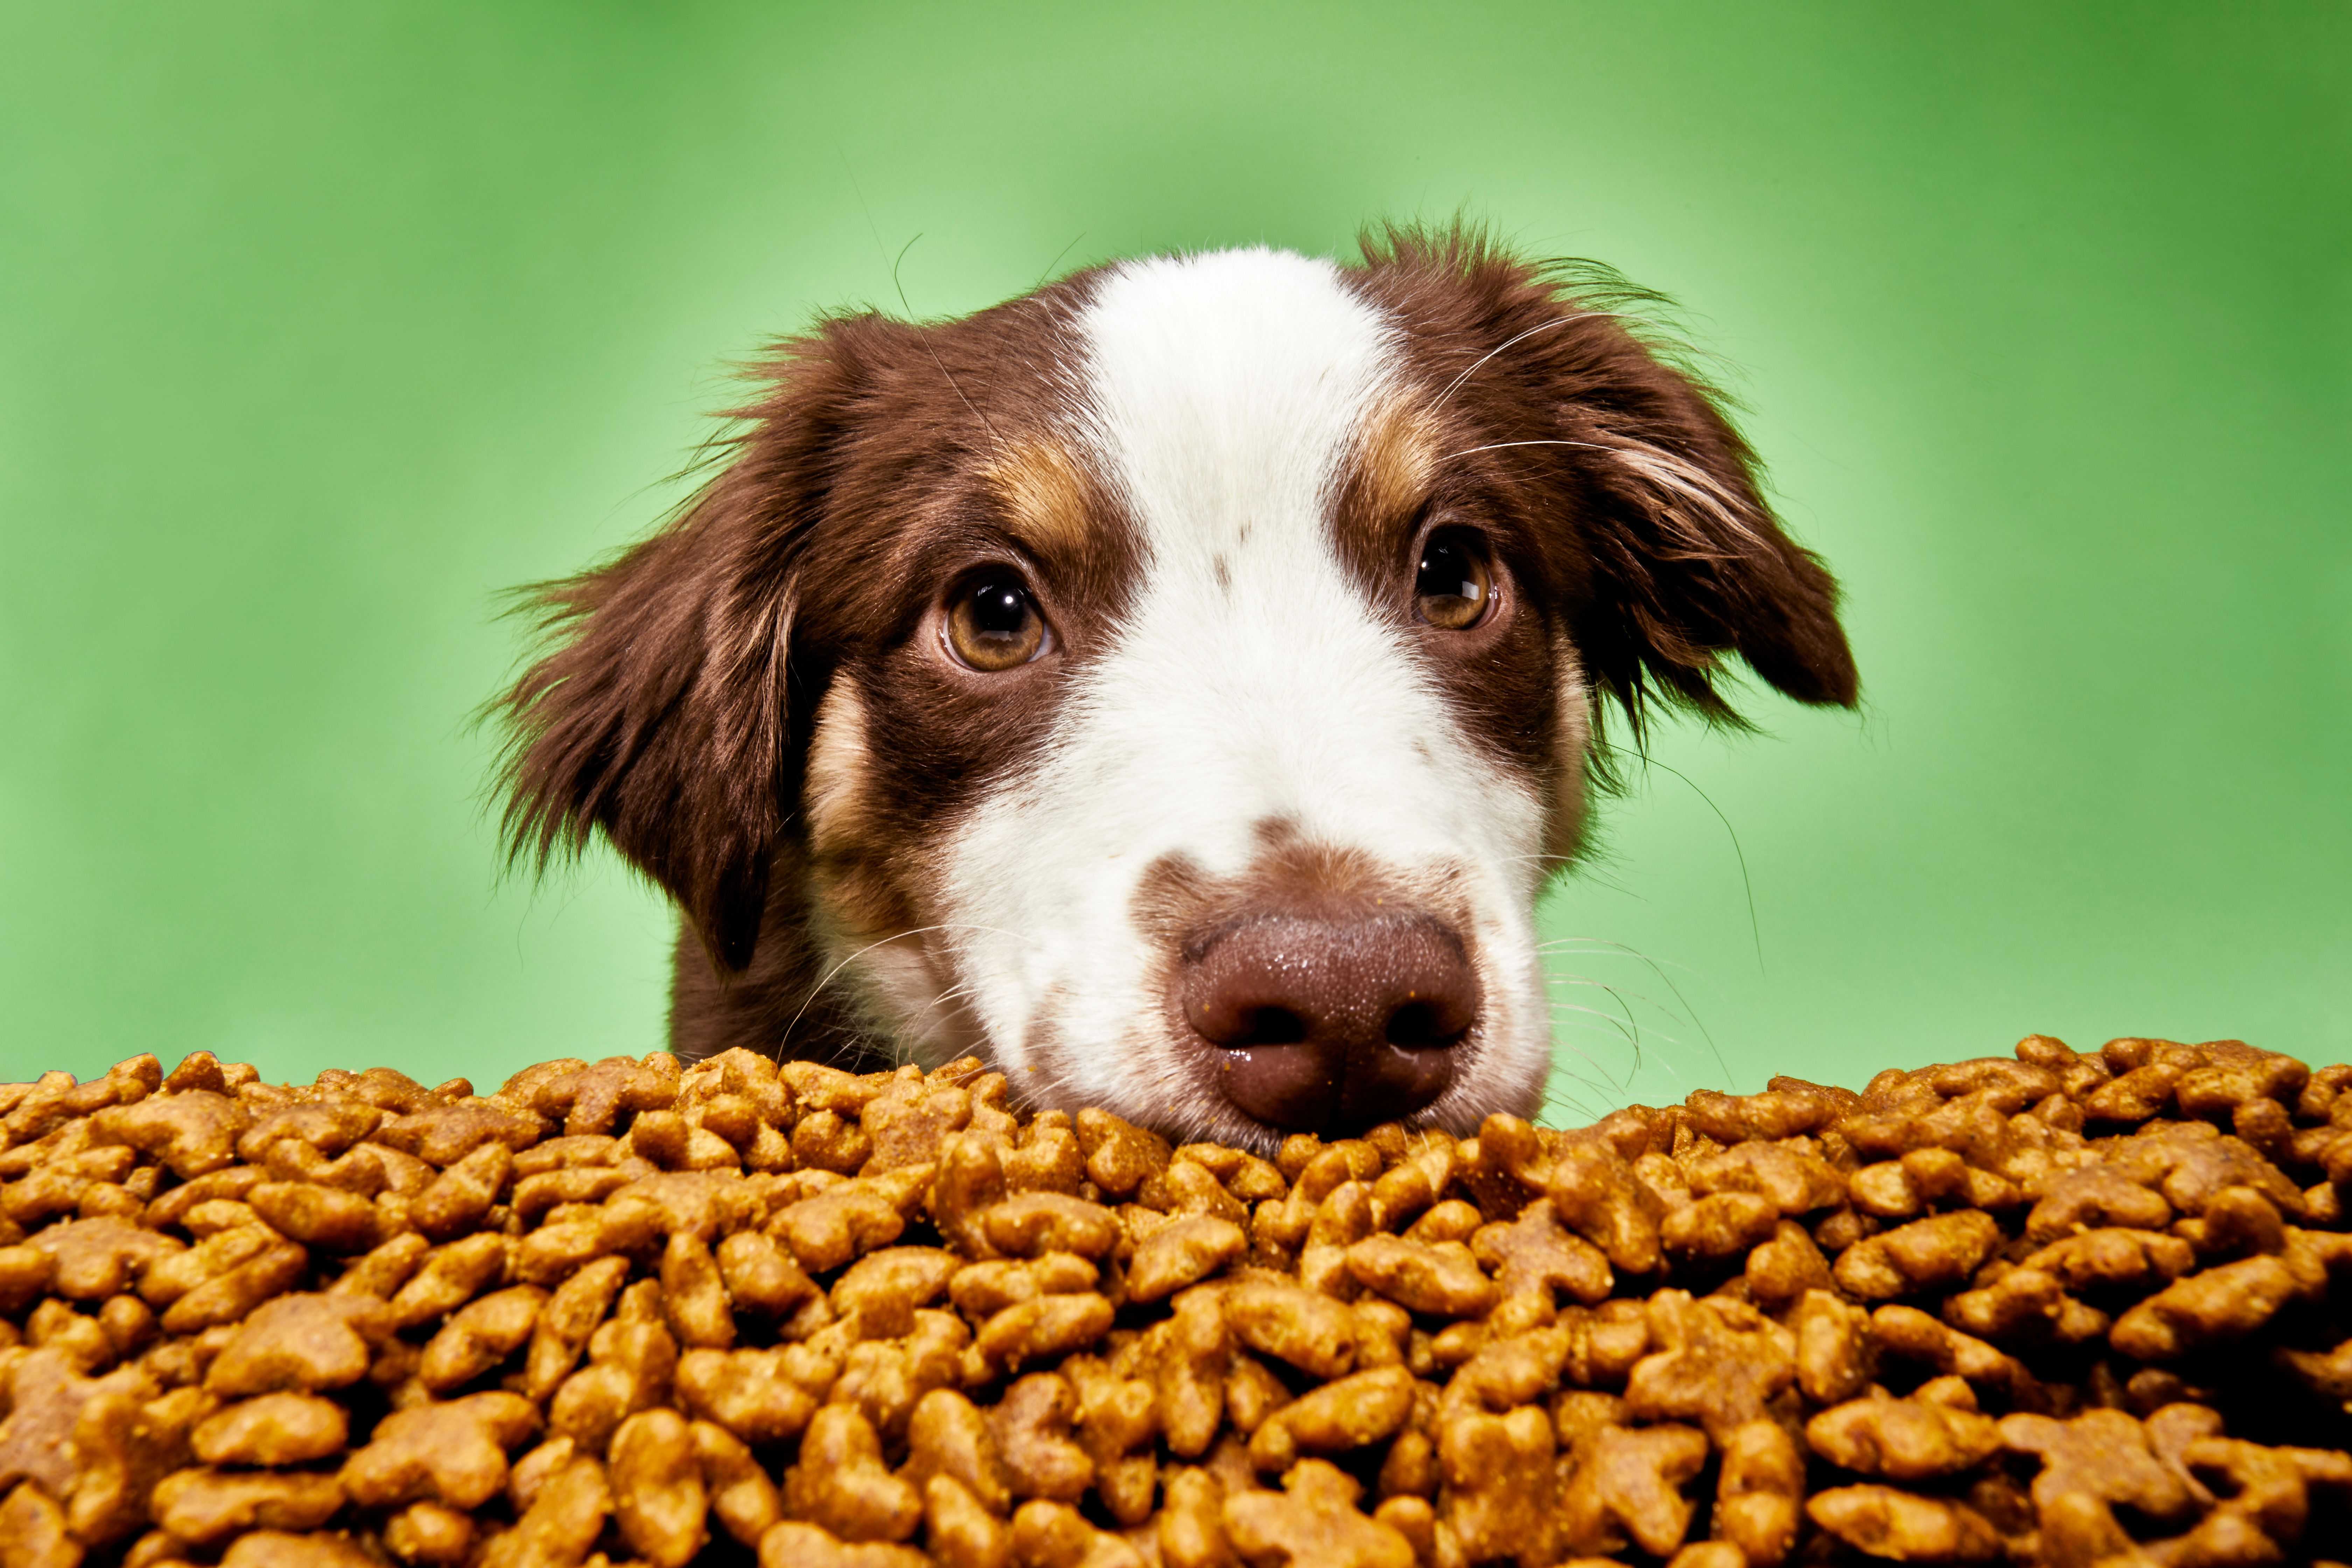 Can You Buy Dog Food With Food Stamps: A Guide for Pet Owners